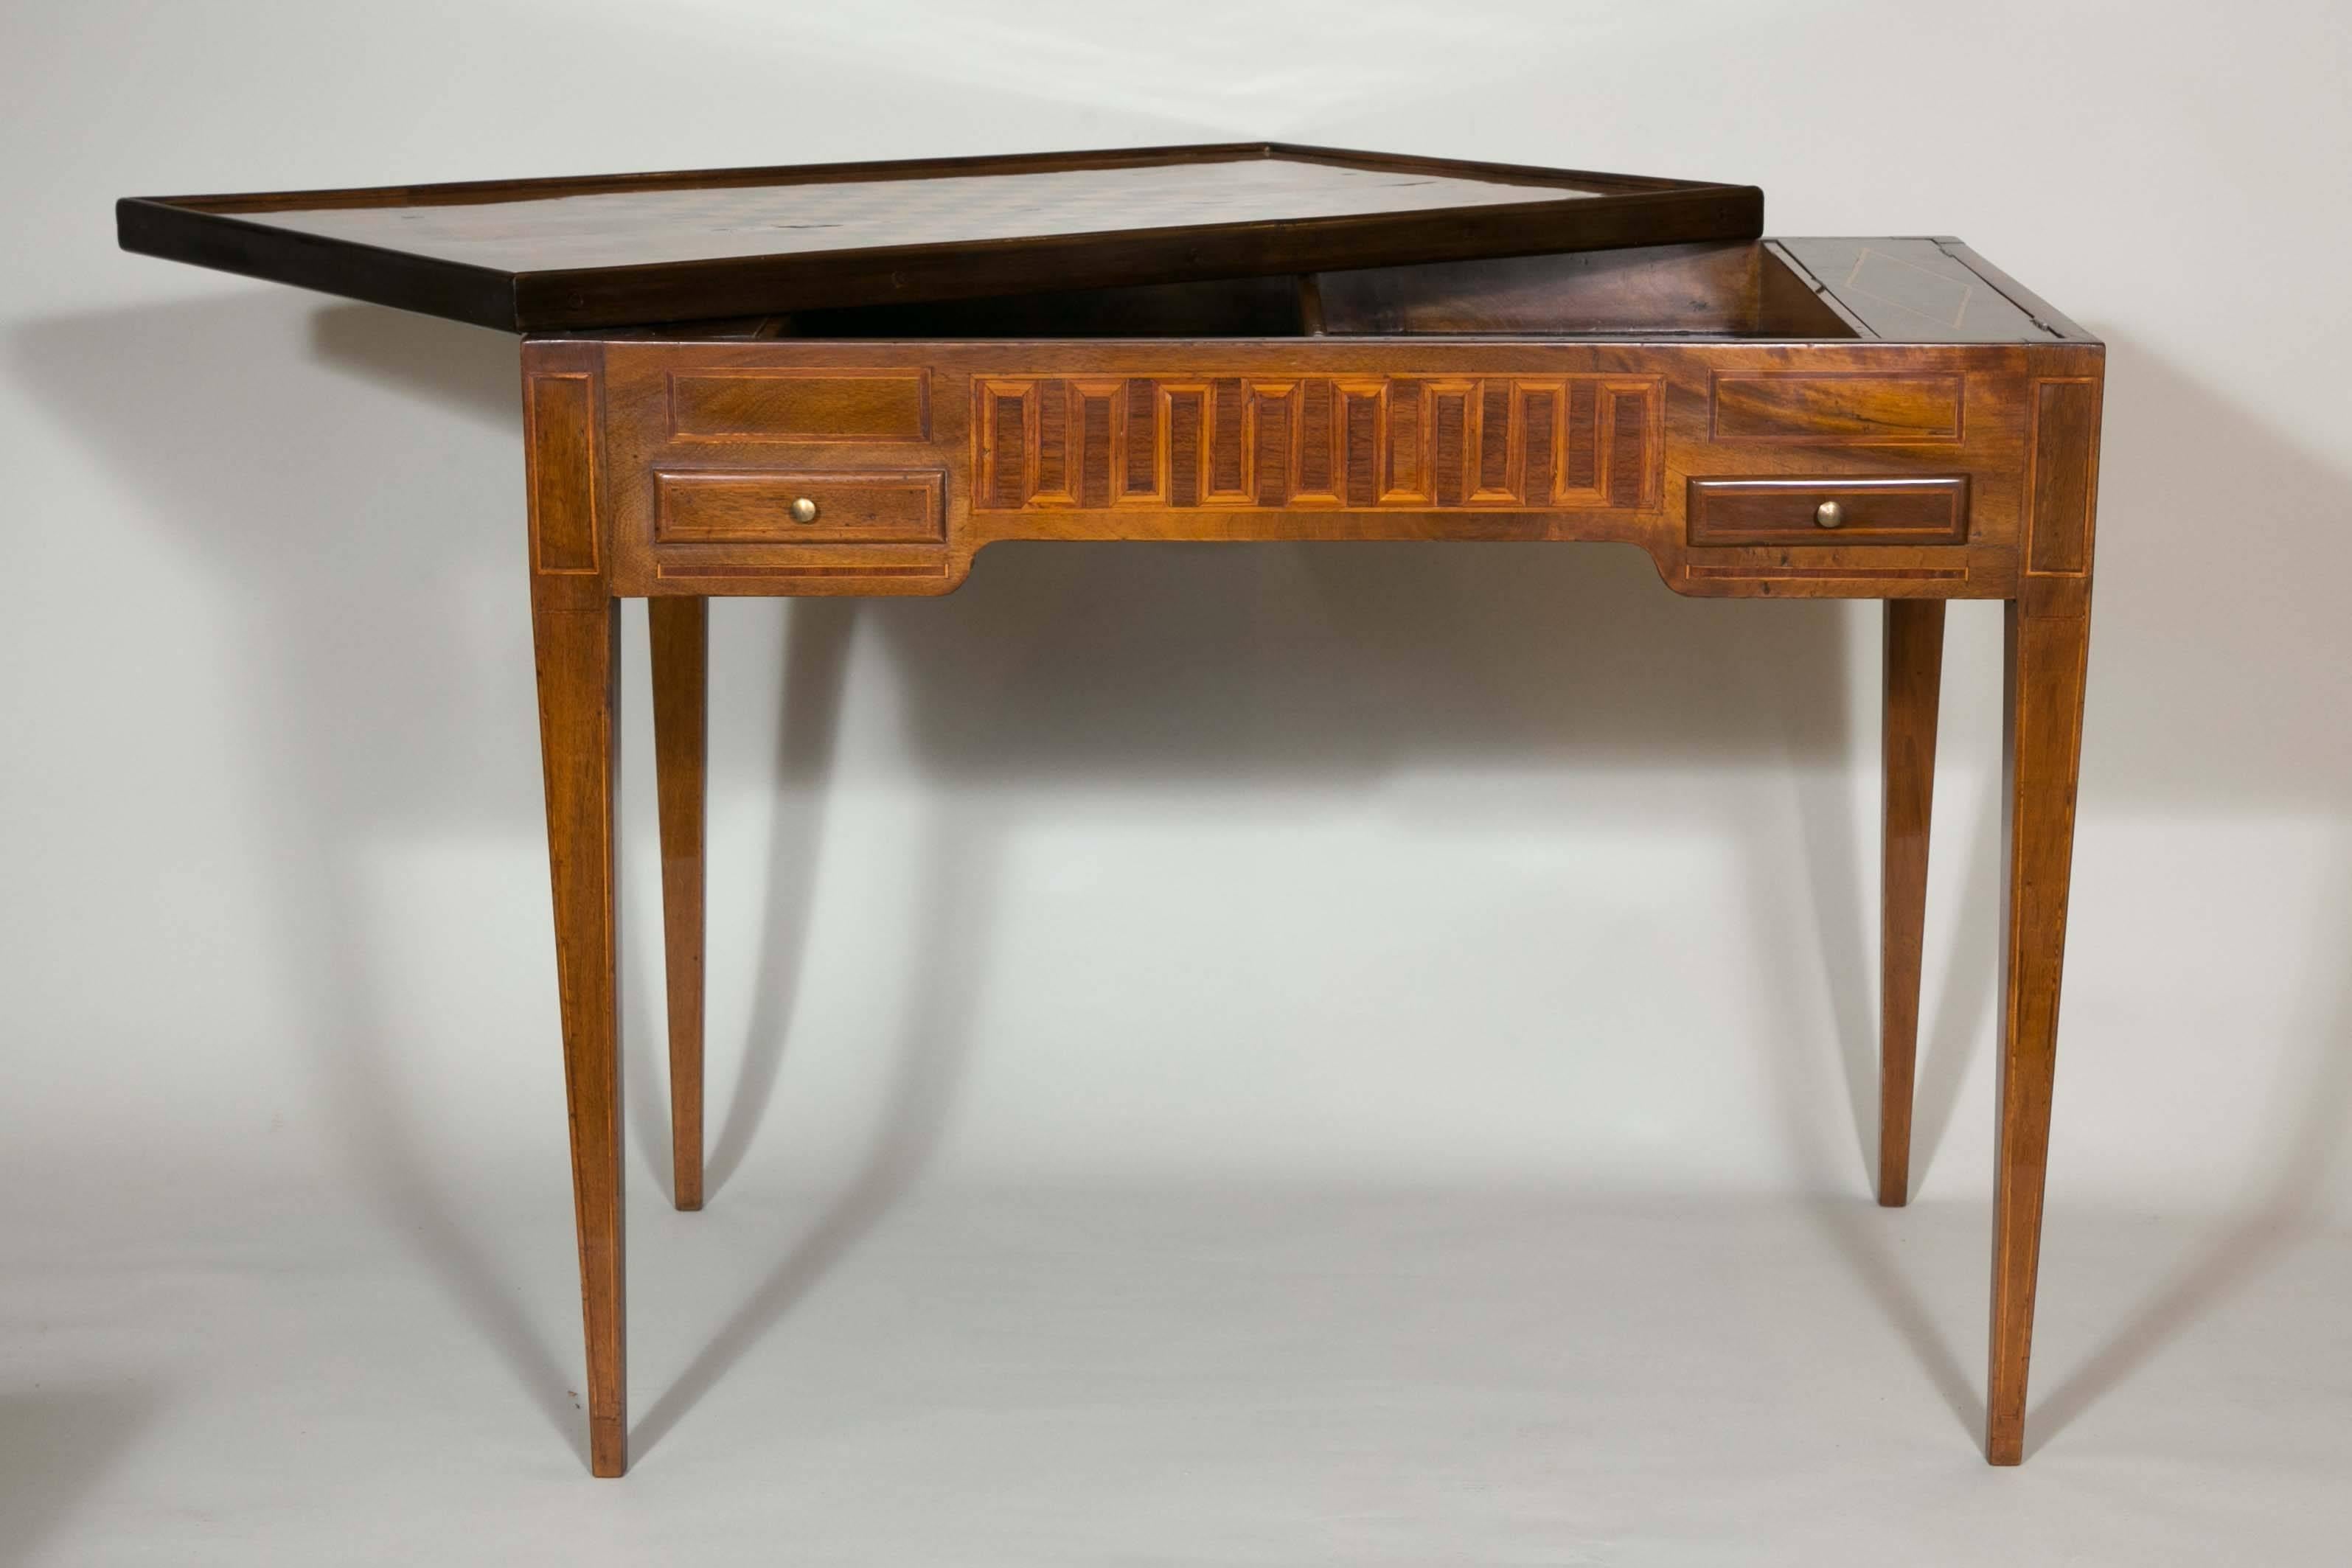 18th century games table in marquetry of precious and rare woods.
 